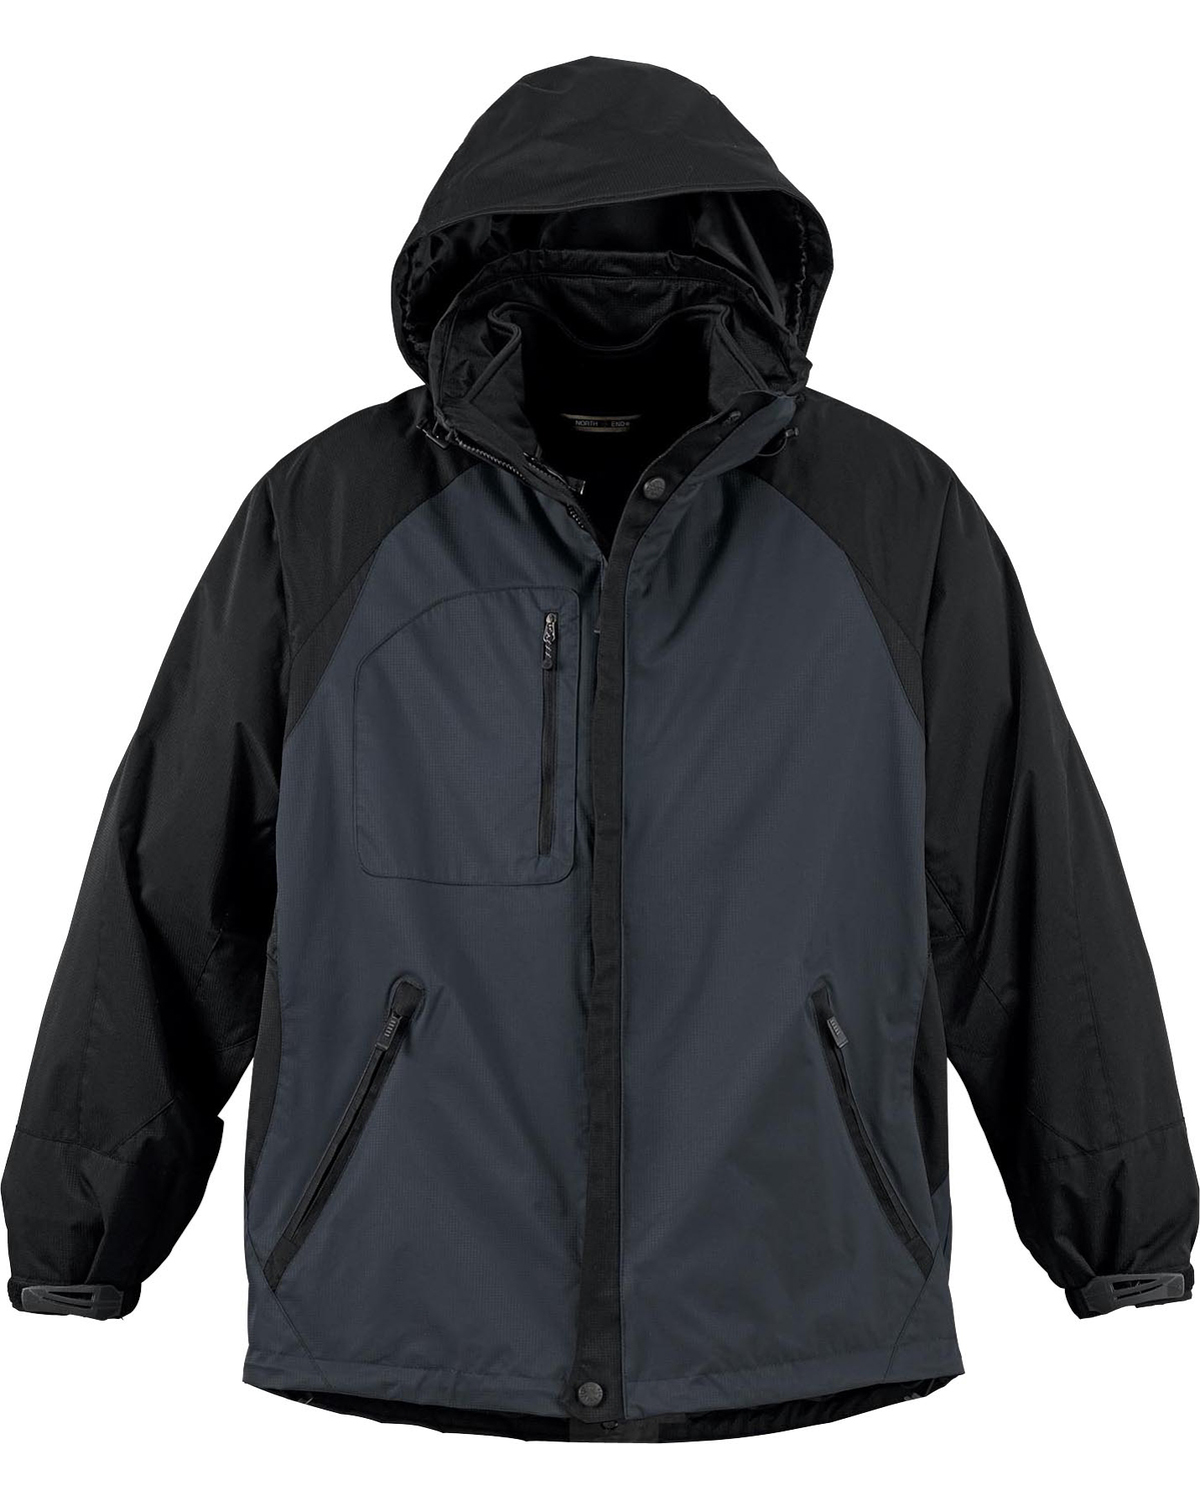 ash-city-north-end-mens-performance-3-In-1-seam-sealed-mid-length-jacket-black